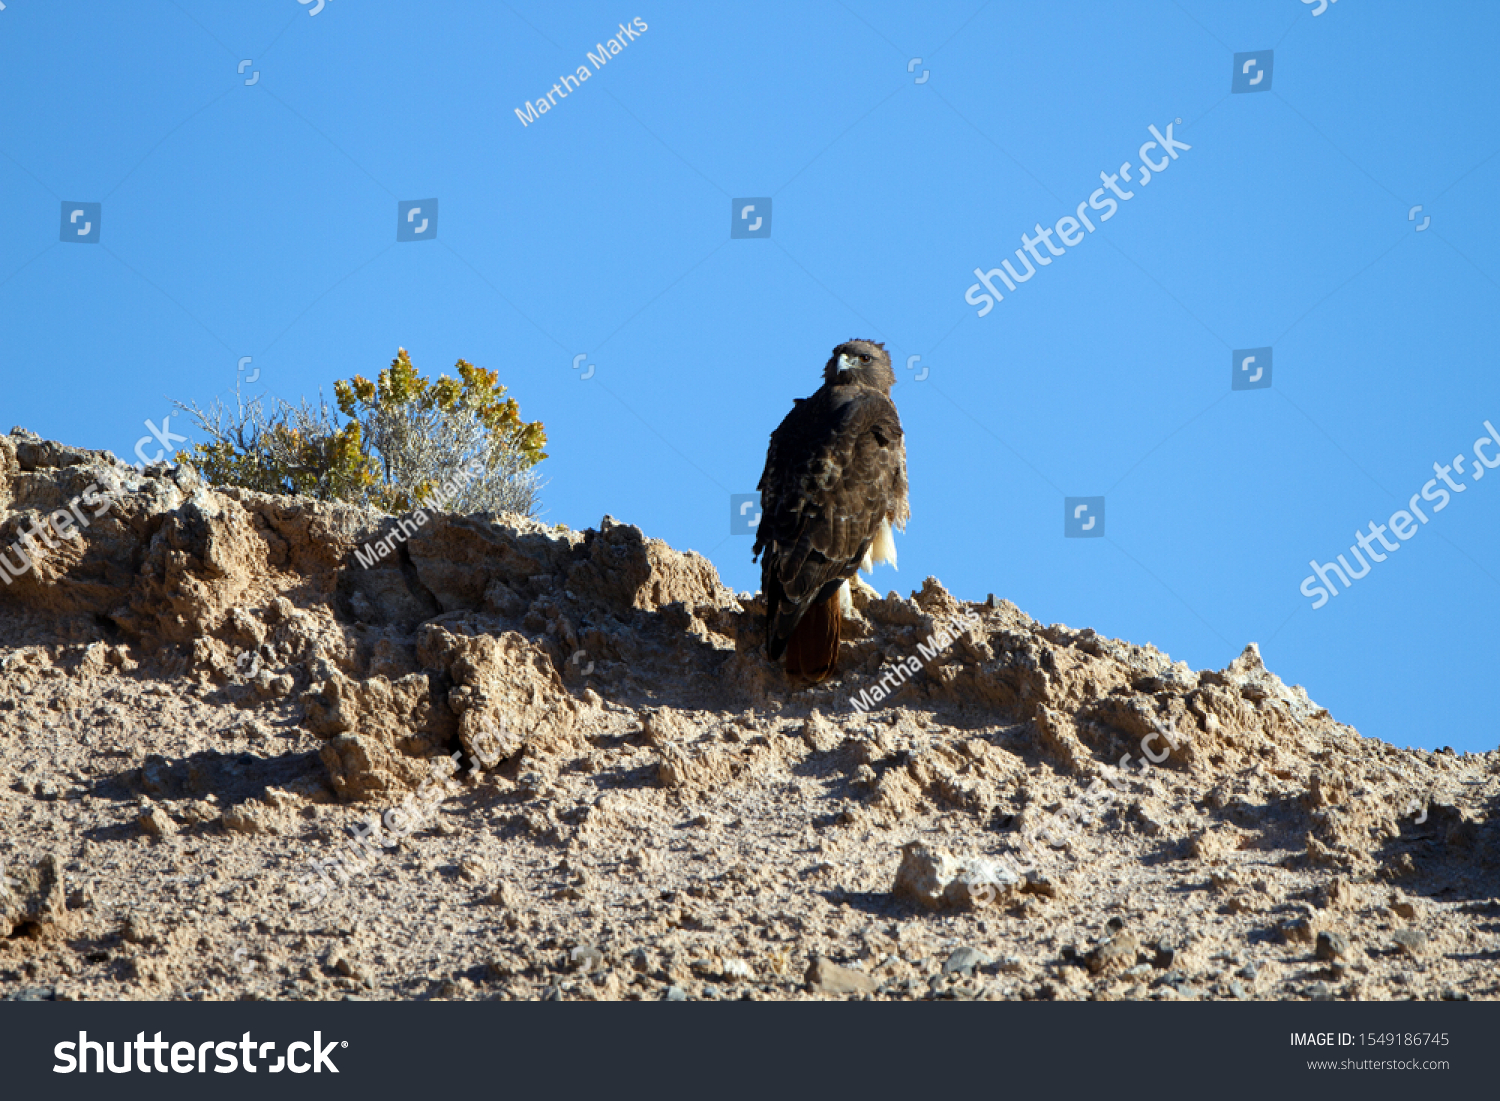 Wind blows the feathers of a Red-tailed Hawk atop a bluff in Lake Mead National Recreation Area in autumn #1549186745